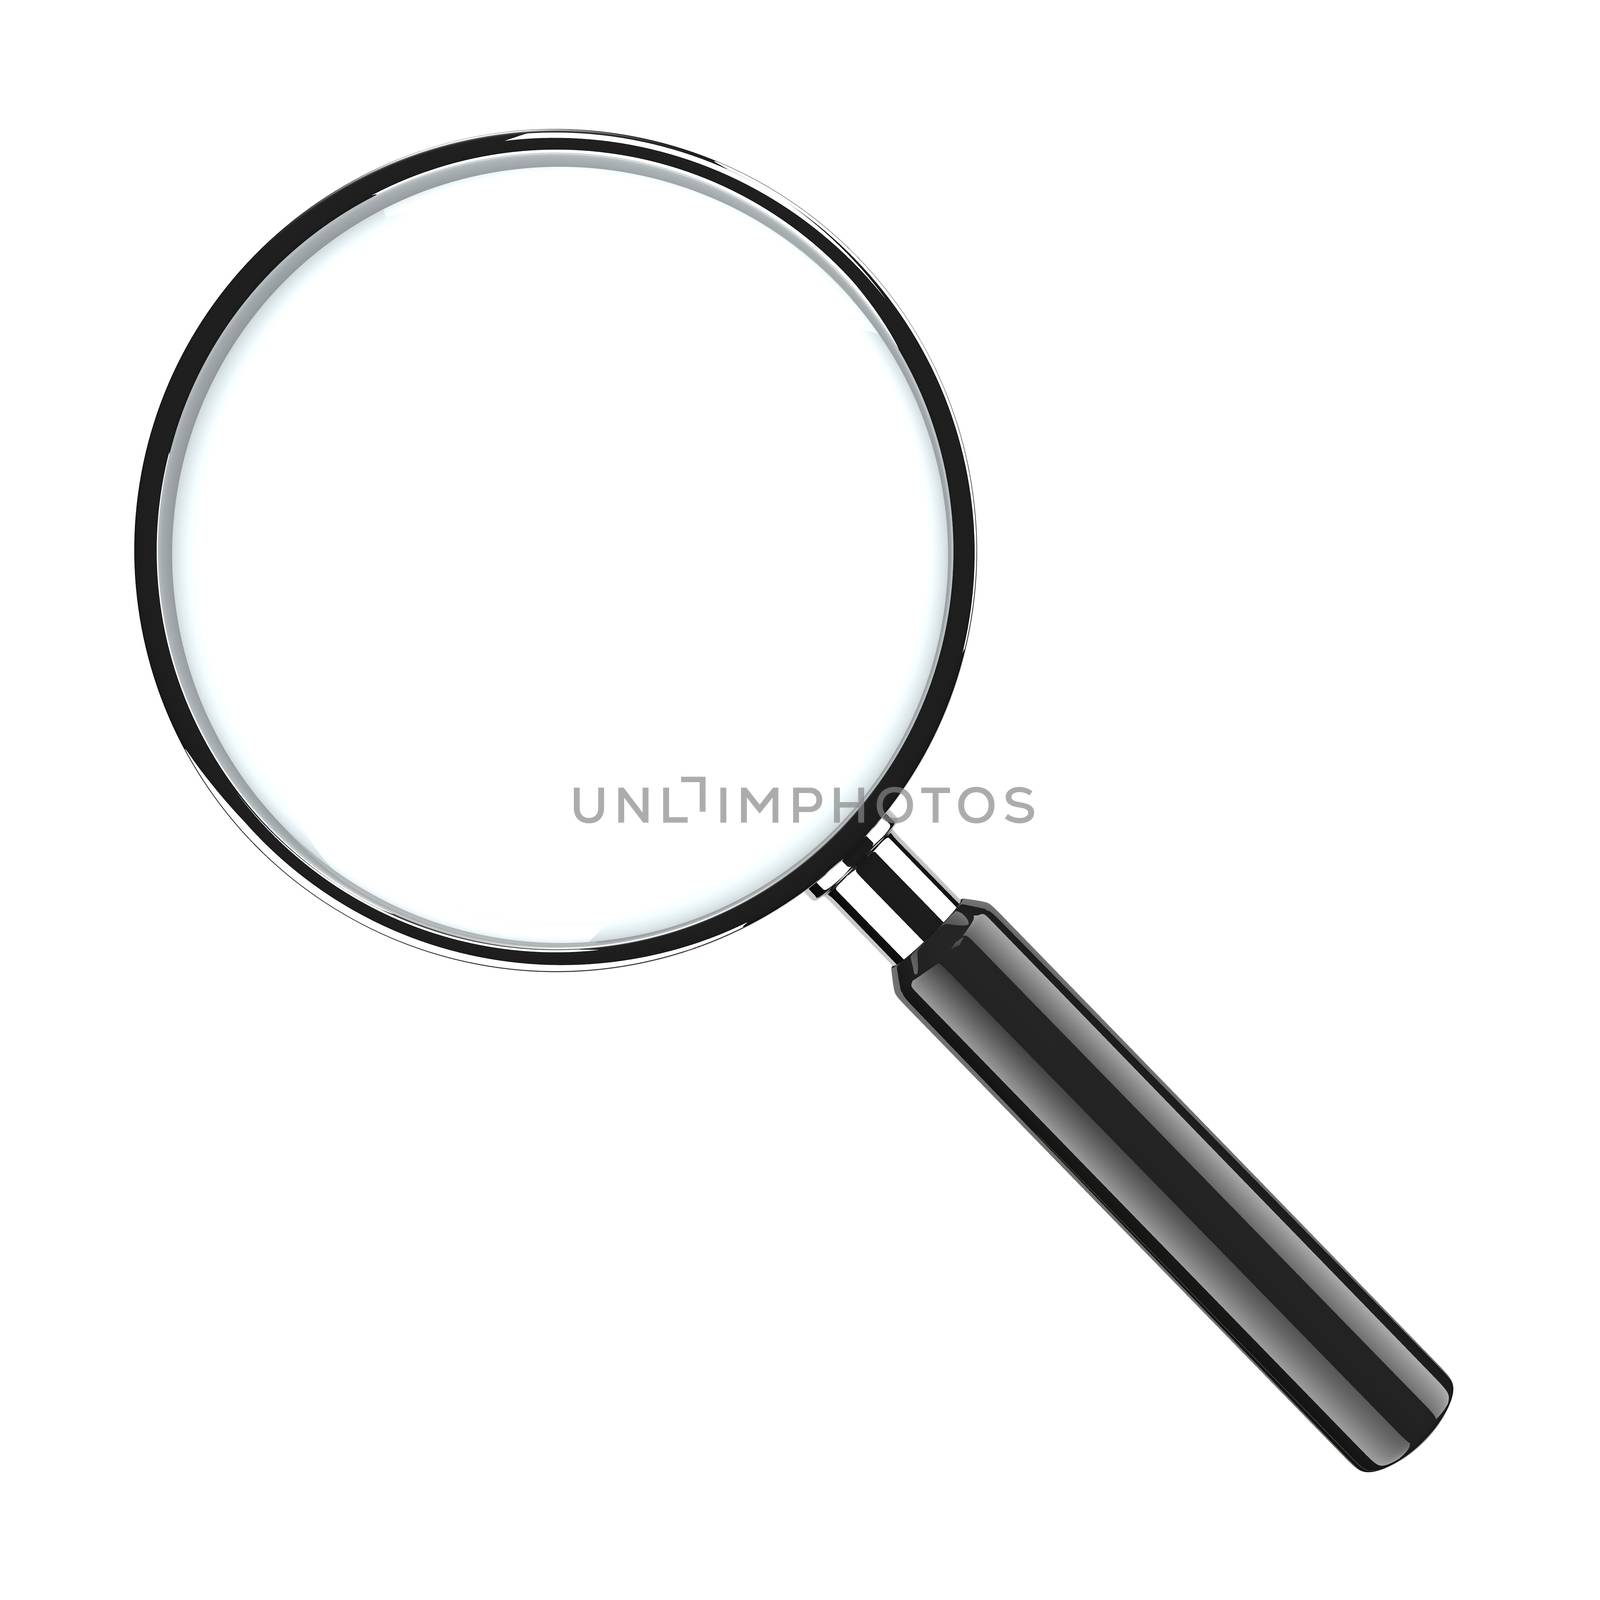 Metal Magnifier Glass Isolated on White Background